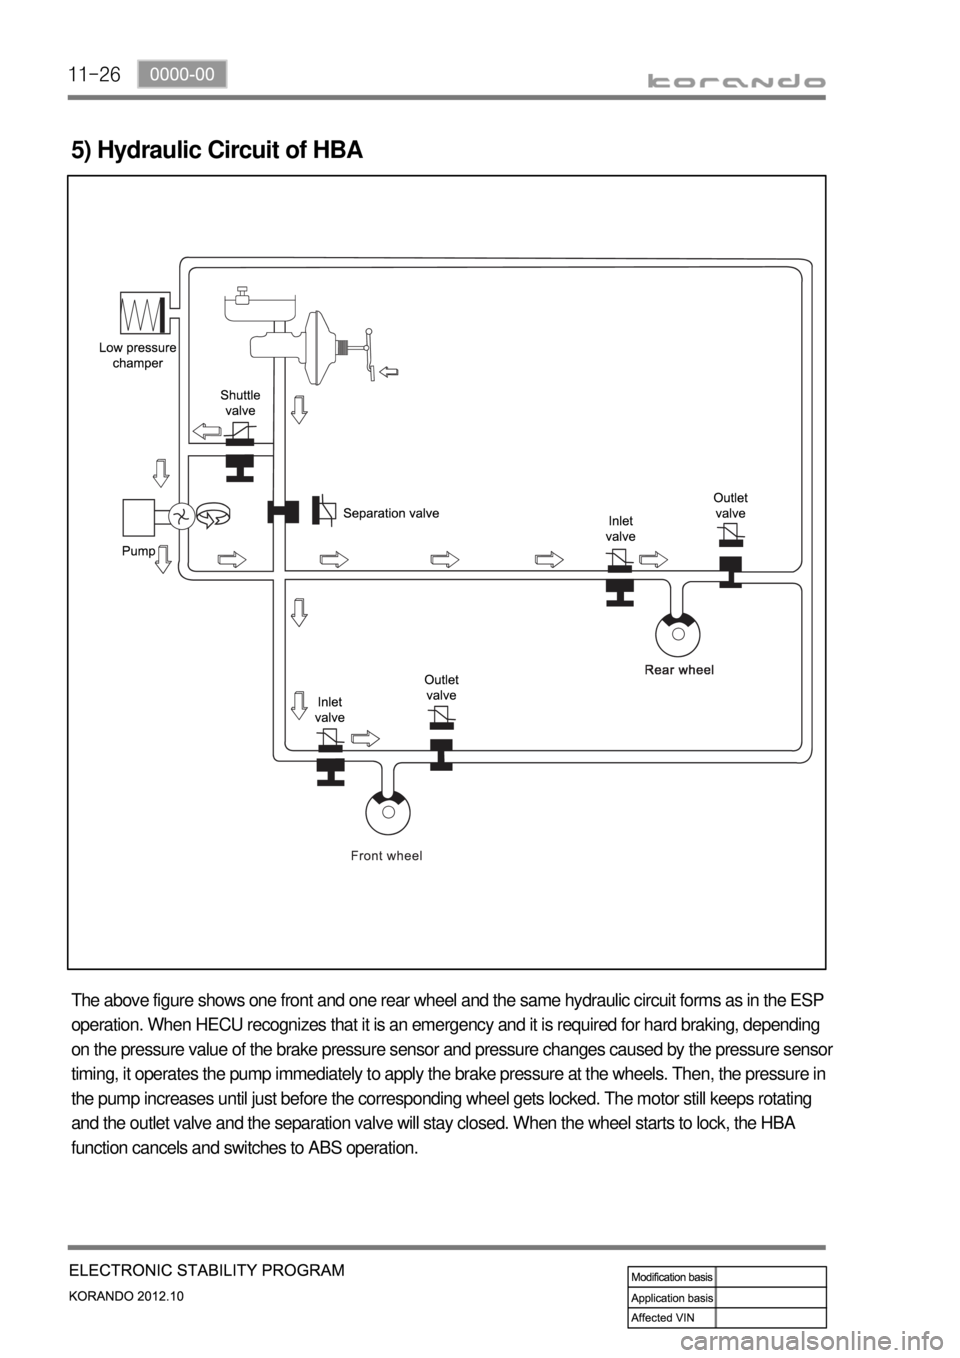 SSANGYONG KORANDO 2012 Owners Manual 11-26
5) Hydraulic Circuit of HBA
The above figure shows one front and one rear wheel and the same hydraulic circuit forms as in the ESP 
operation. When HECU recognizes that it is an emergency and it